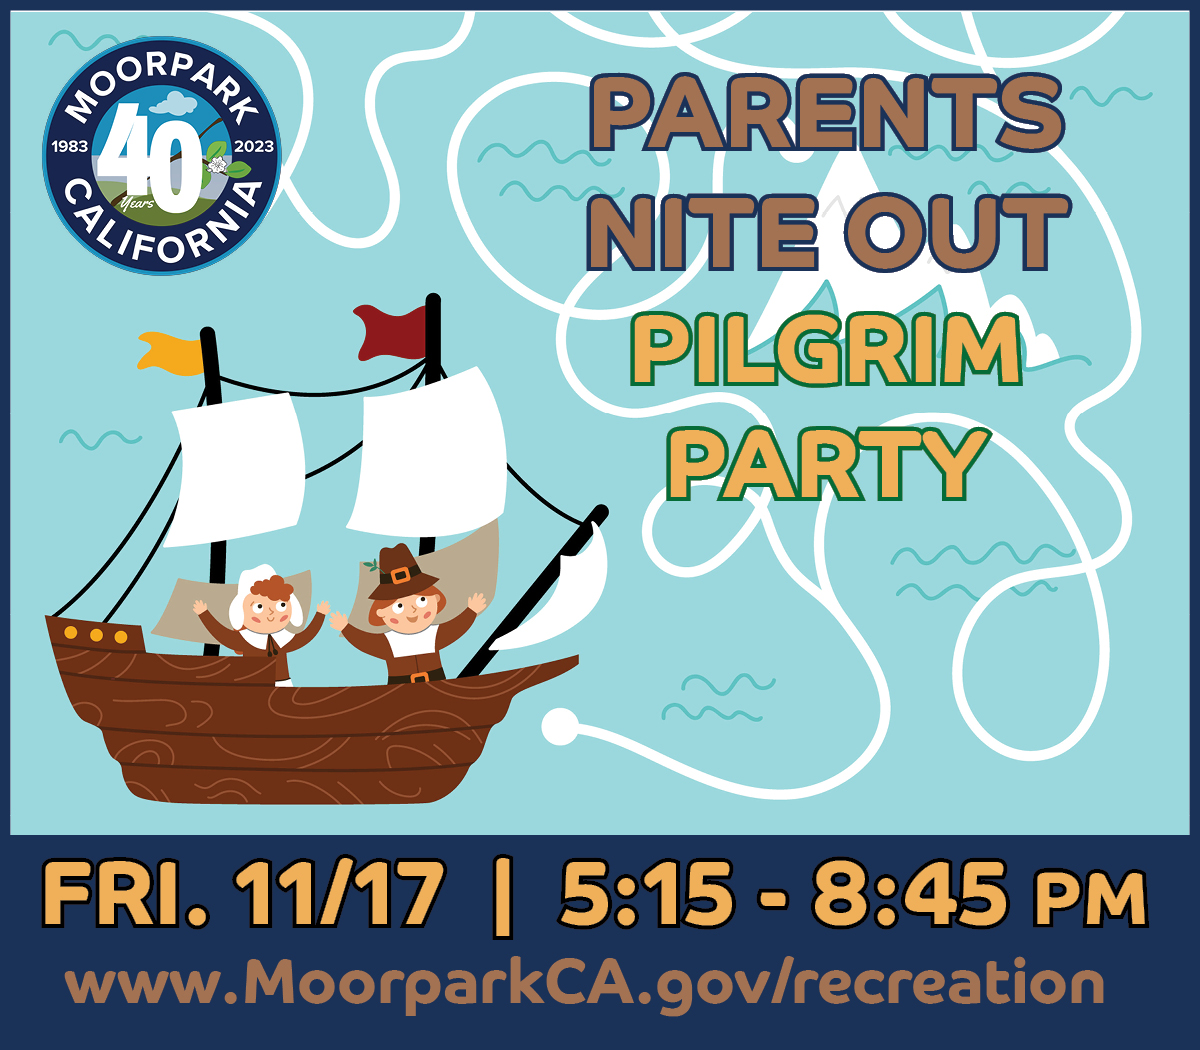 Parents Nite Out! Nov. 17 from 5:15-8:45 pm. Thanksgiving fun is on the menu! Mayflower ships, games, & pumpkin hand pies plus the movie Free Birds make a fun evening for the kids, and you get a night out! Send them with a sack dinner. moorparkca.gov/recreation or (805) 517-6300.